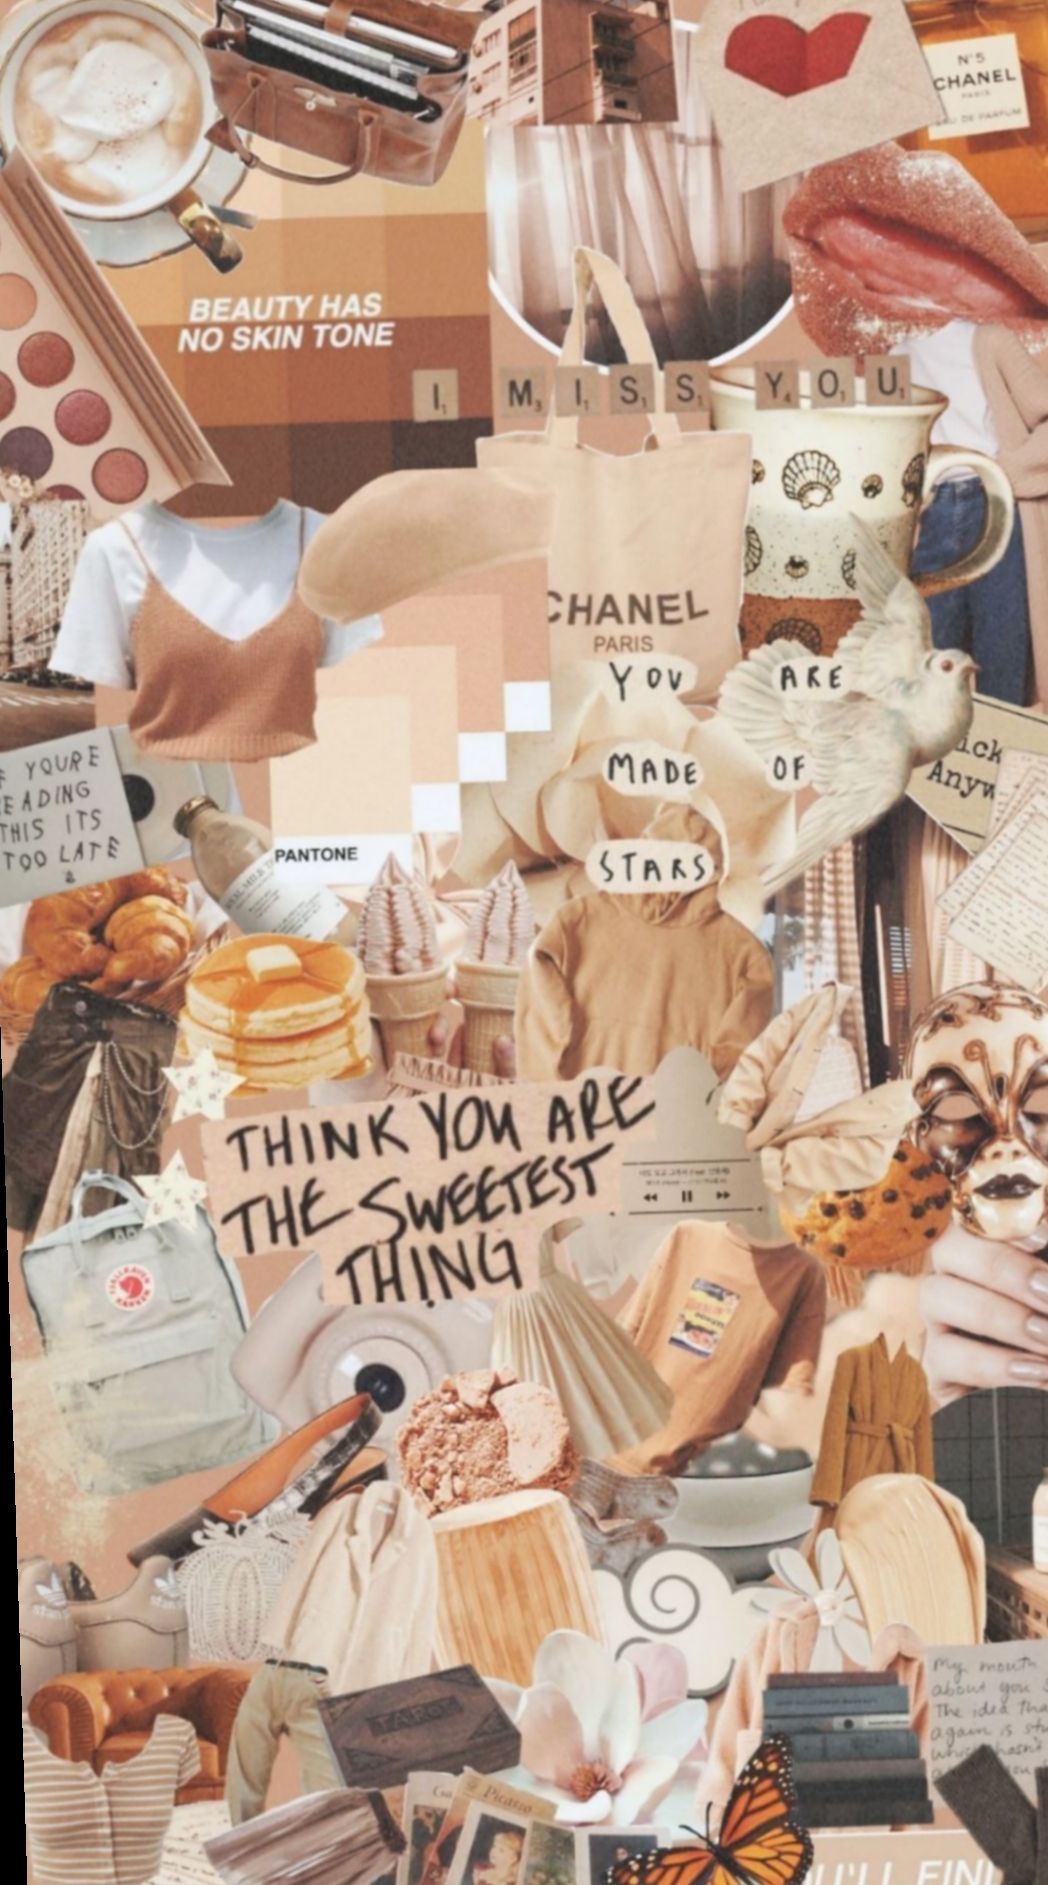 A collage of images including coffee, a butterfly, and a handbag. - Fashion, TikTok